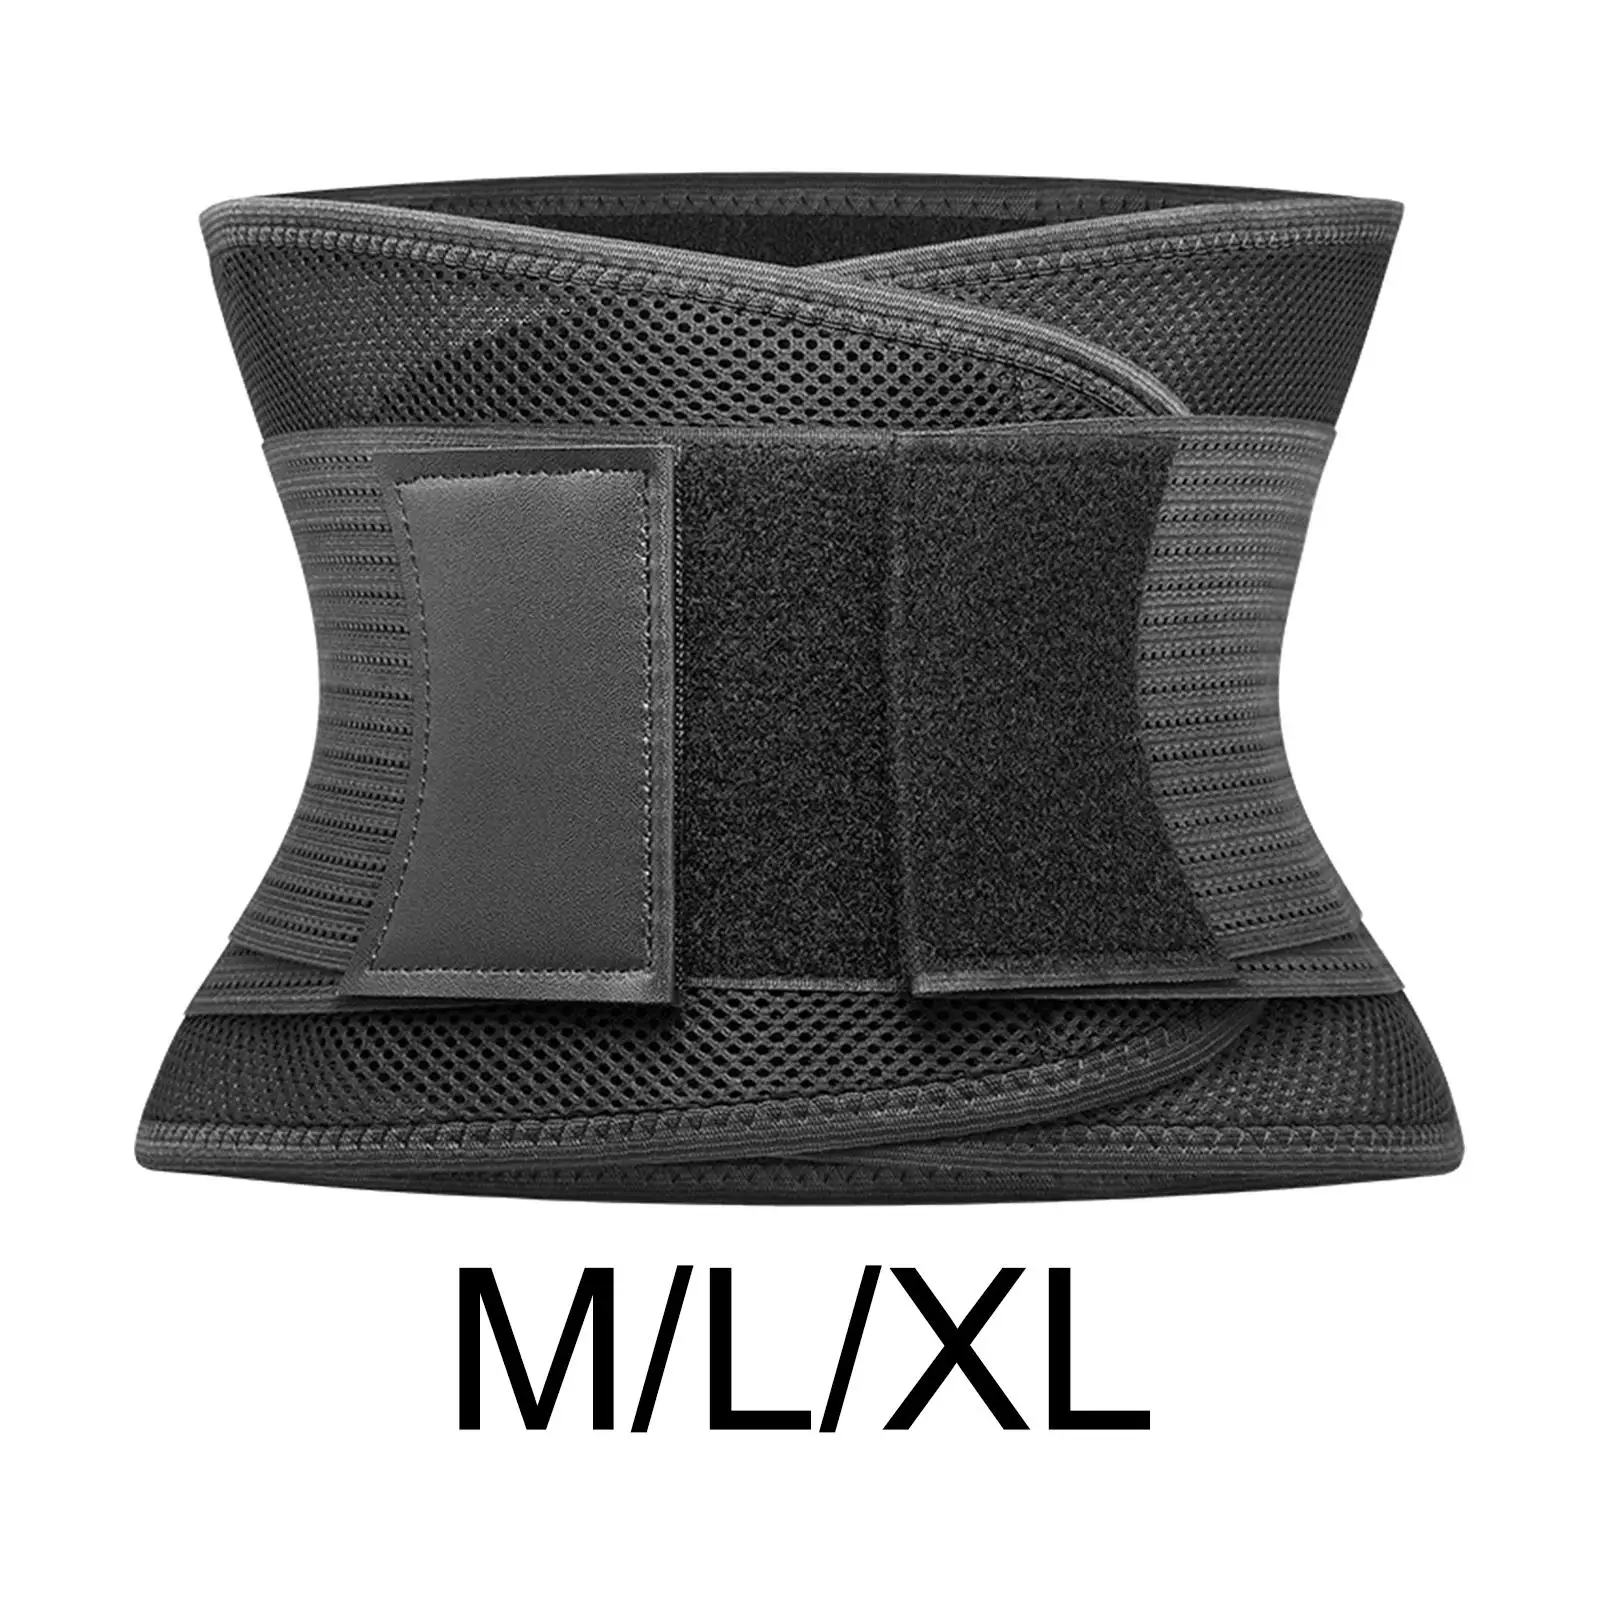 Nylon Waist Support Belt Back Brace Compression Body Building Lumbar with 4 Stays Breathable Lower Back Support for Men Women